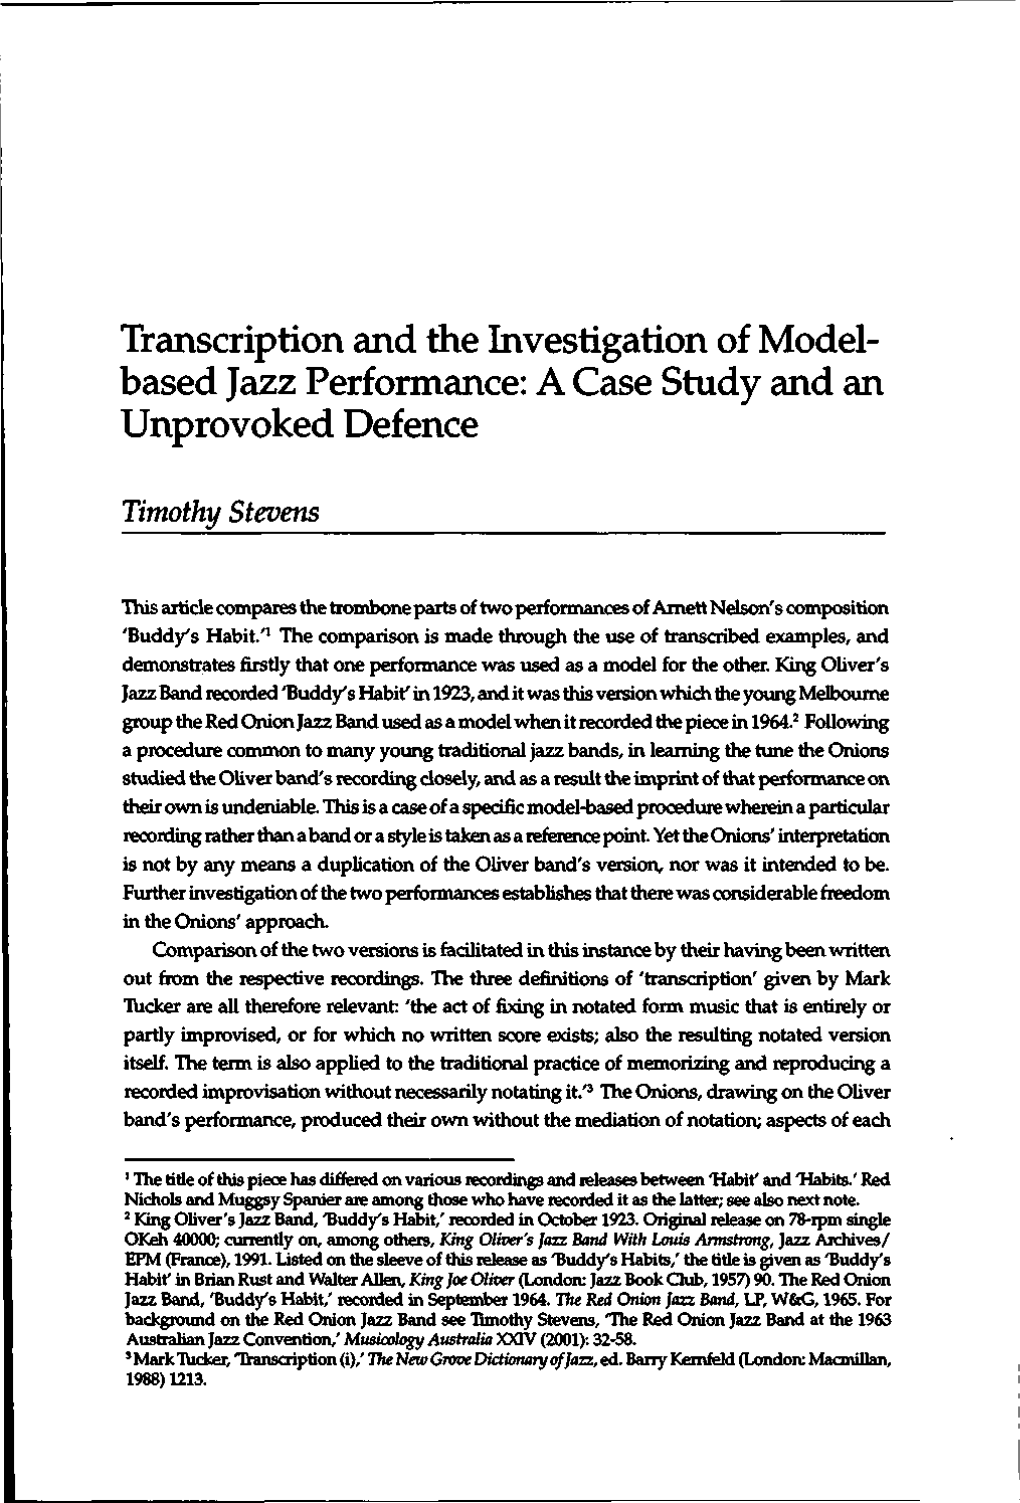 Transcription and the Investigation of Model- Based Jazz Performance: a Case Study and an Unprovoked Defence